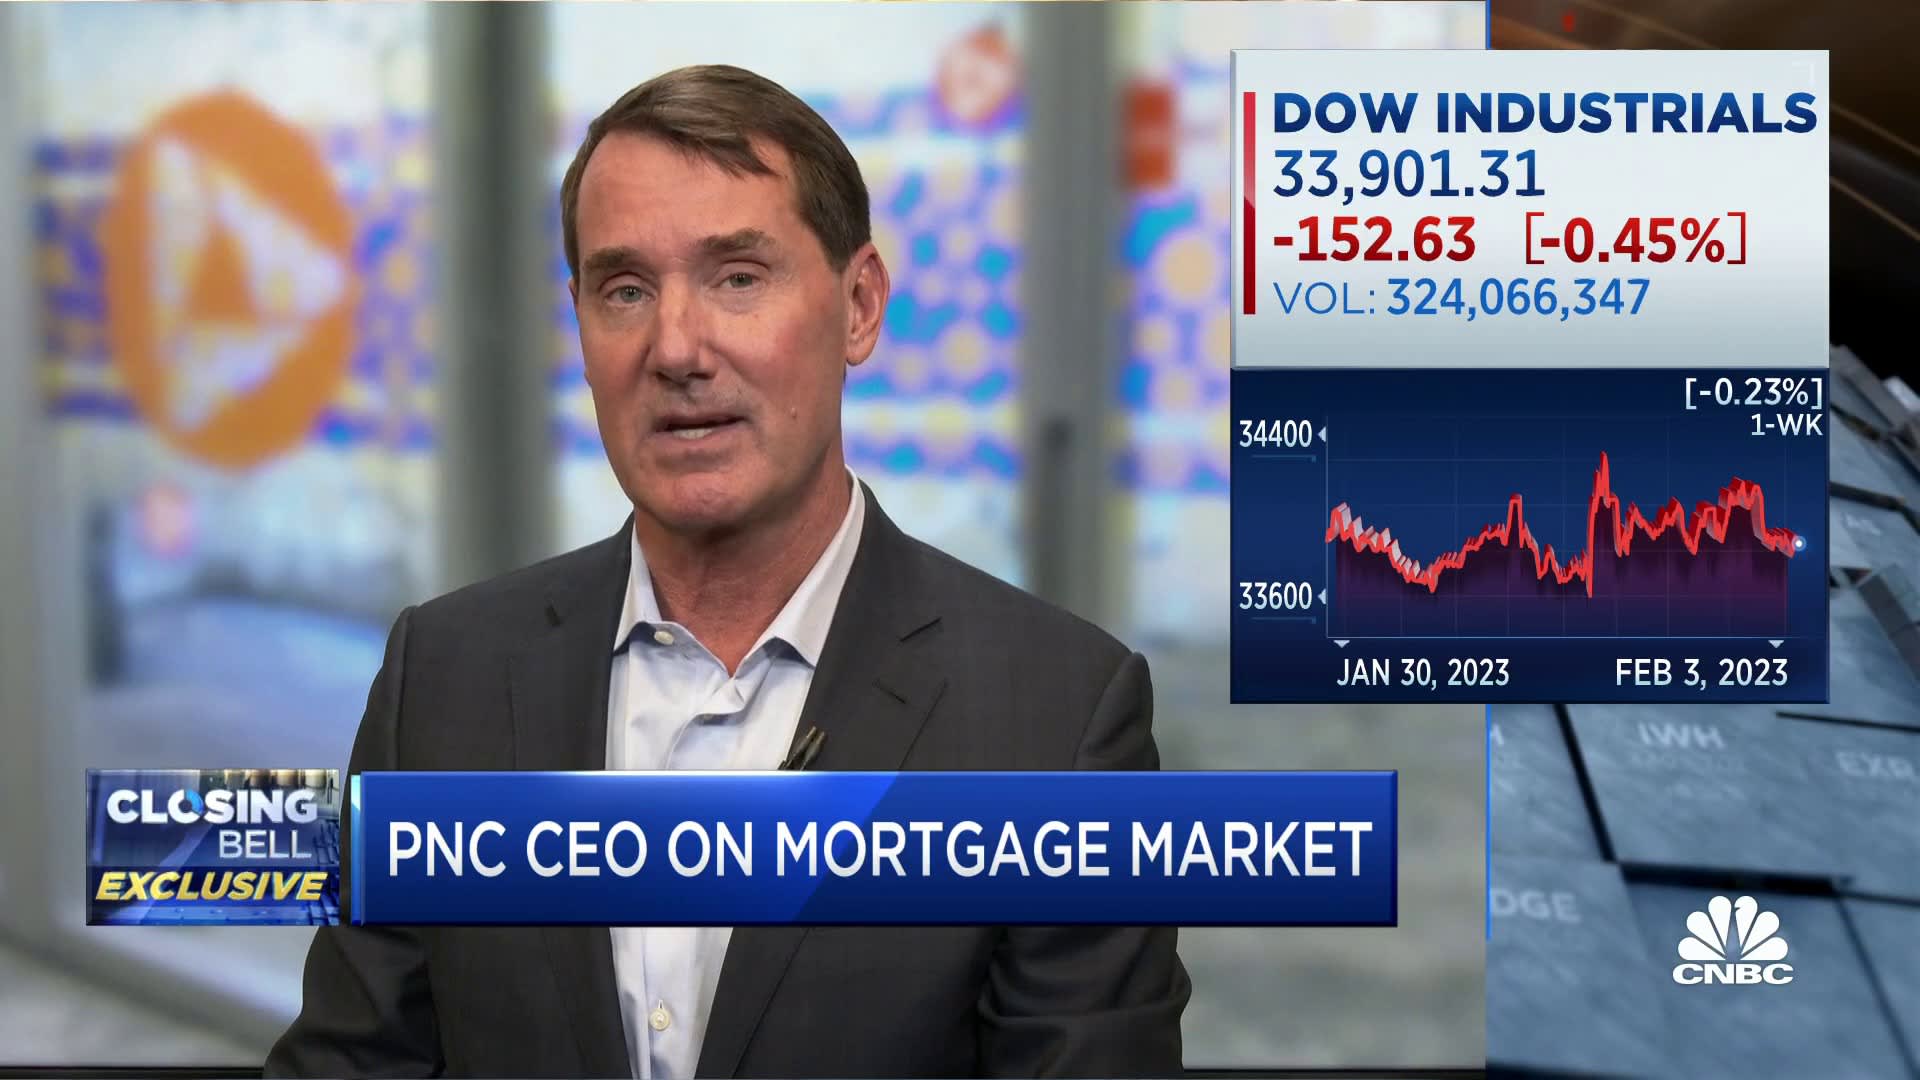 Watch CNBC’s full interview with PNC CEO Bill Demchak on mortgage market